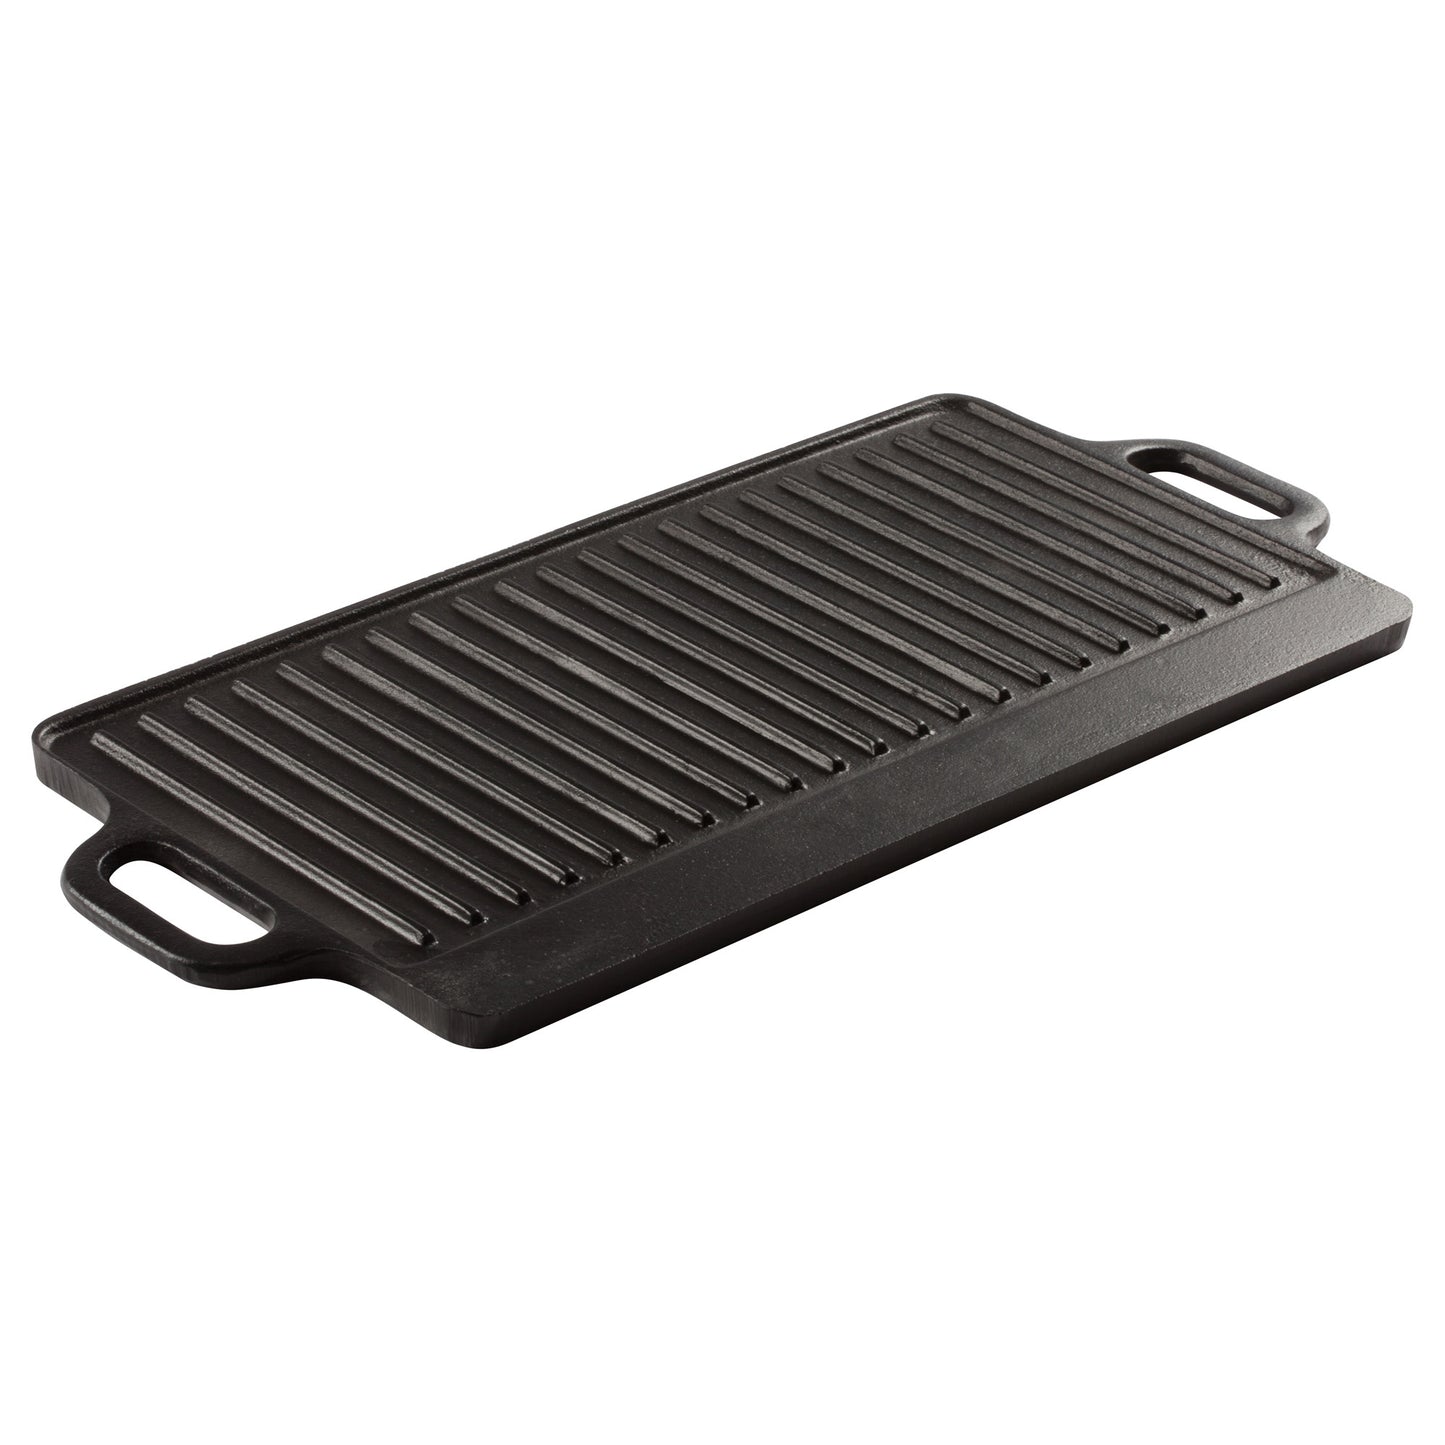 Reversible Cast Iron Griddle/Grill, 20" x 9-1/2"